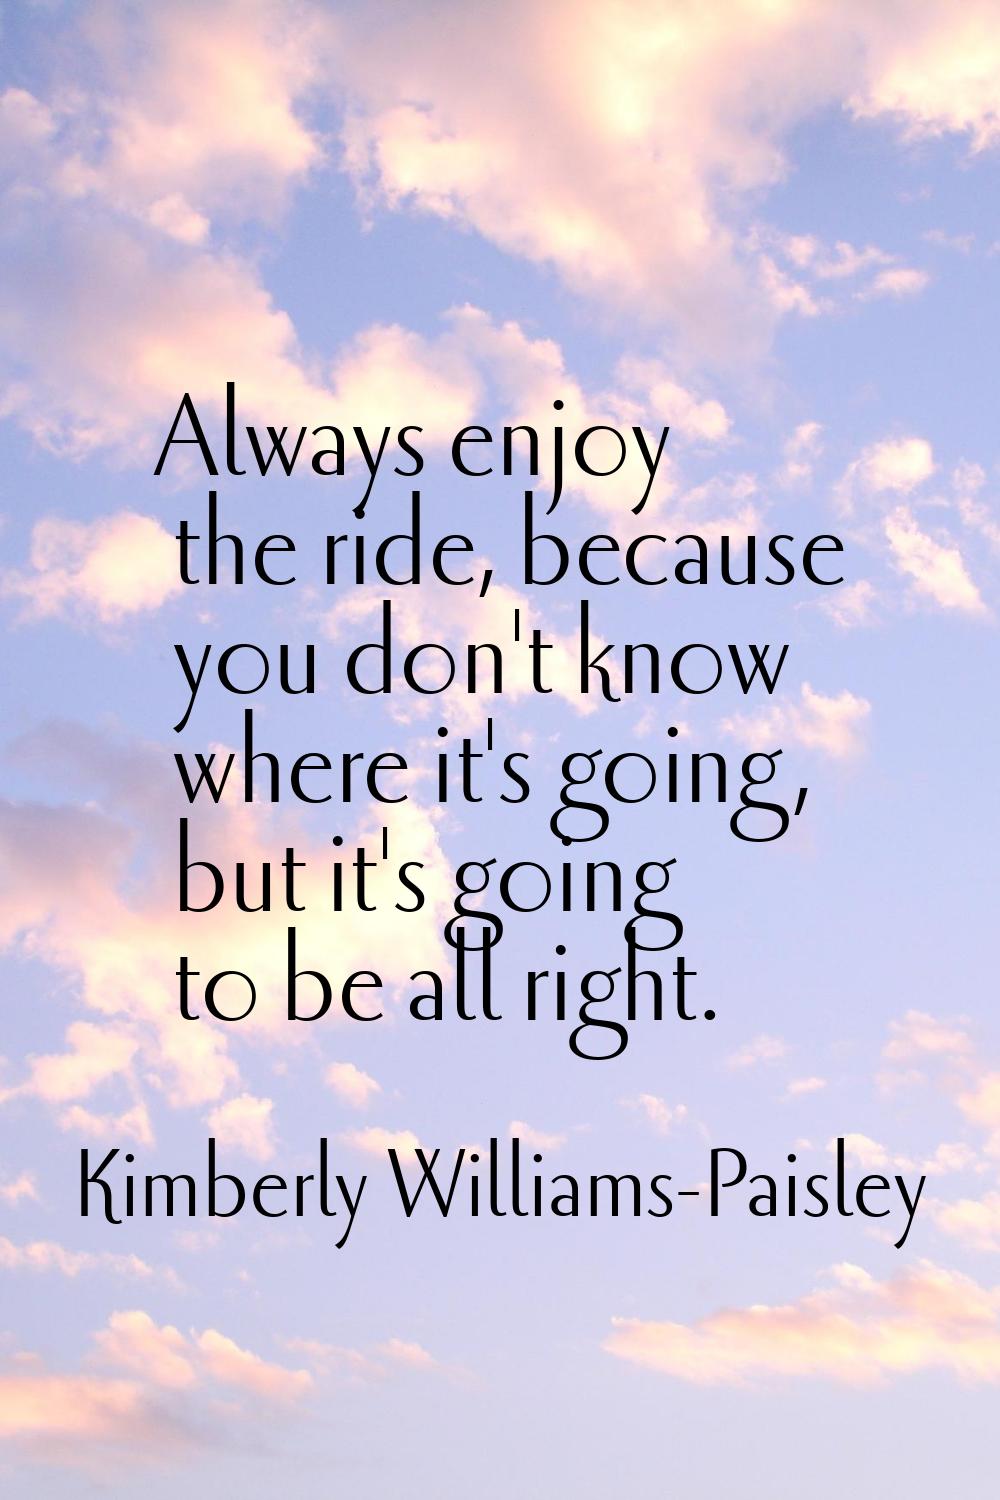 Always enjoy the ride, because you don't know where it's going, but it's going to be all right.